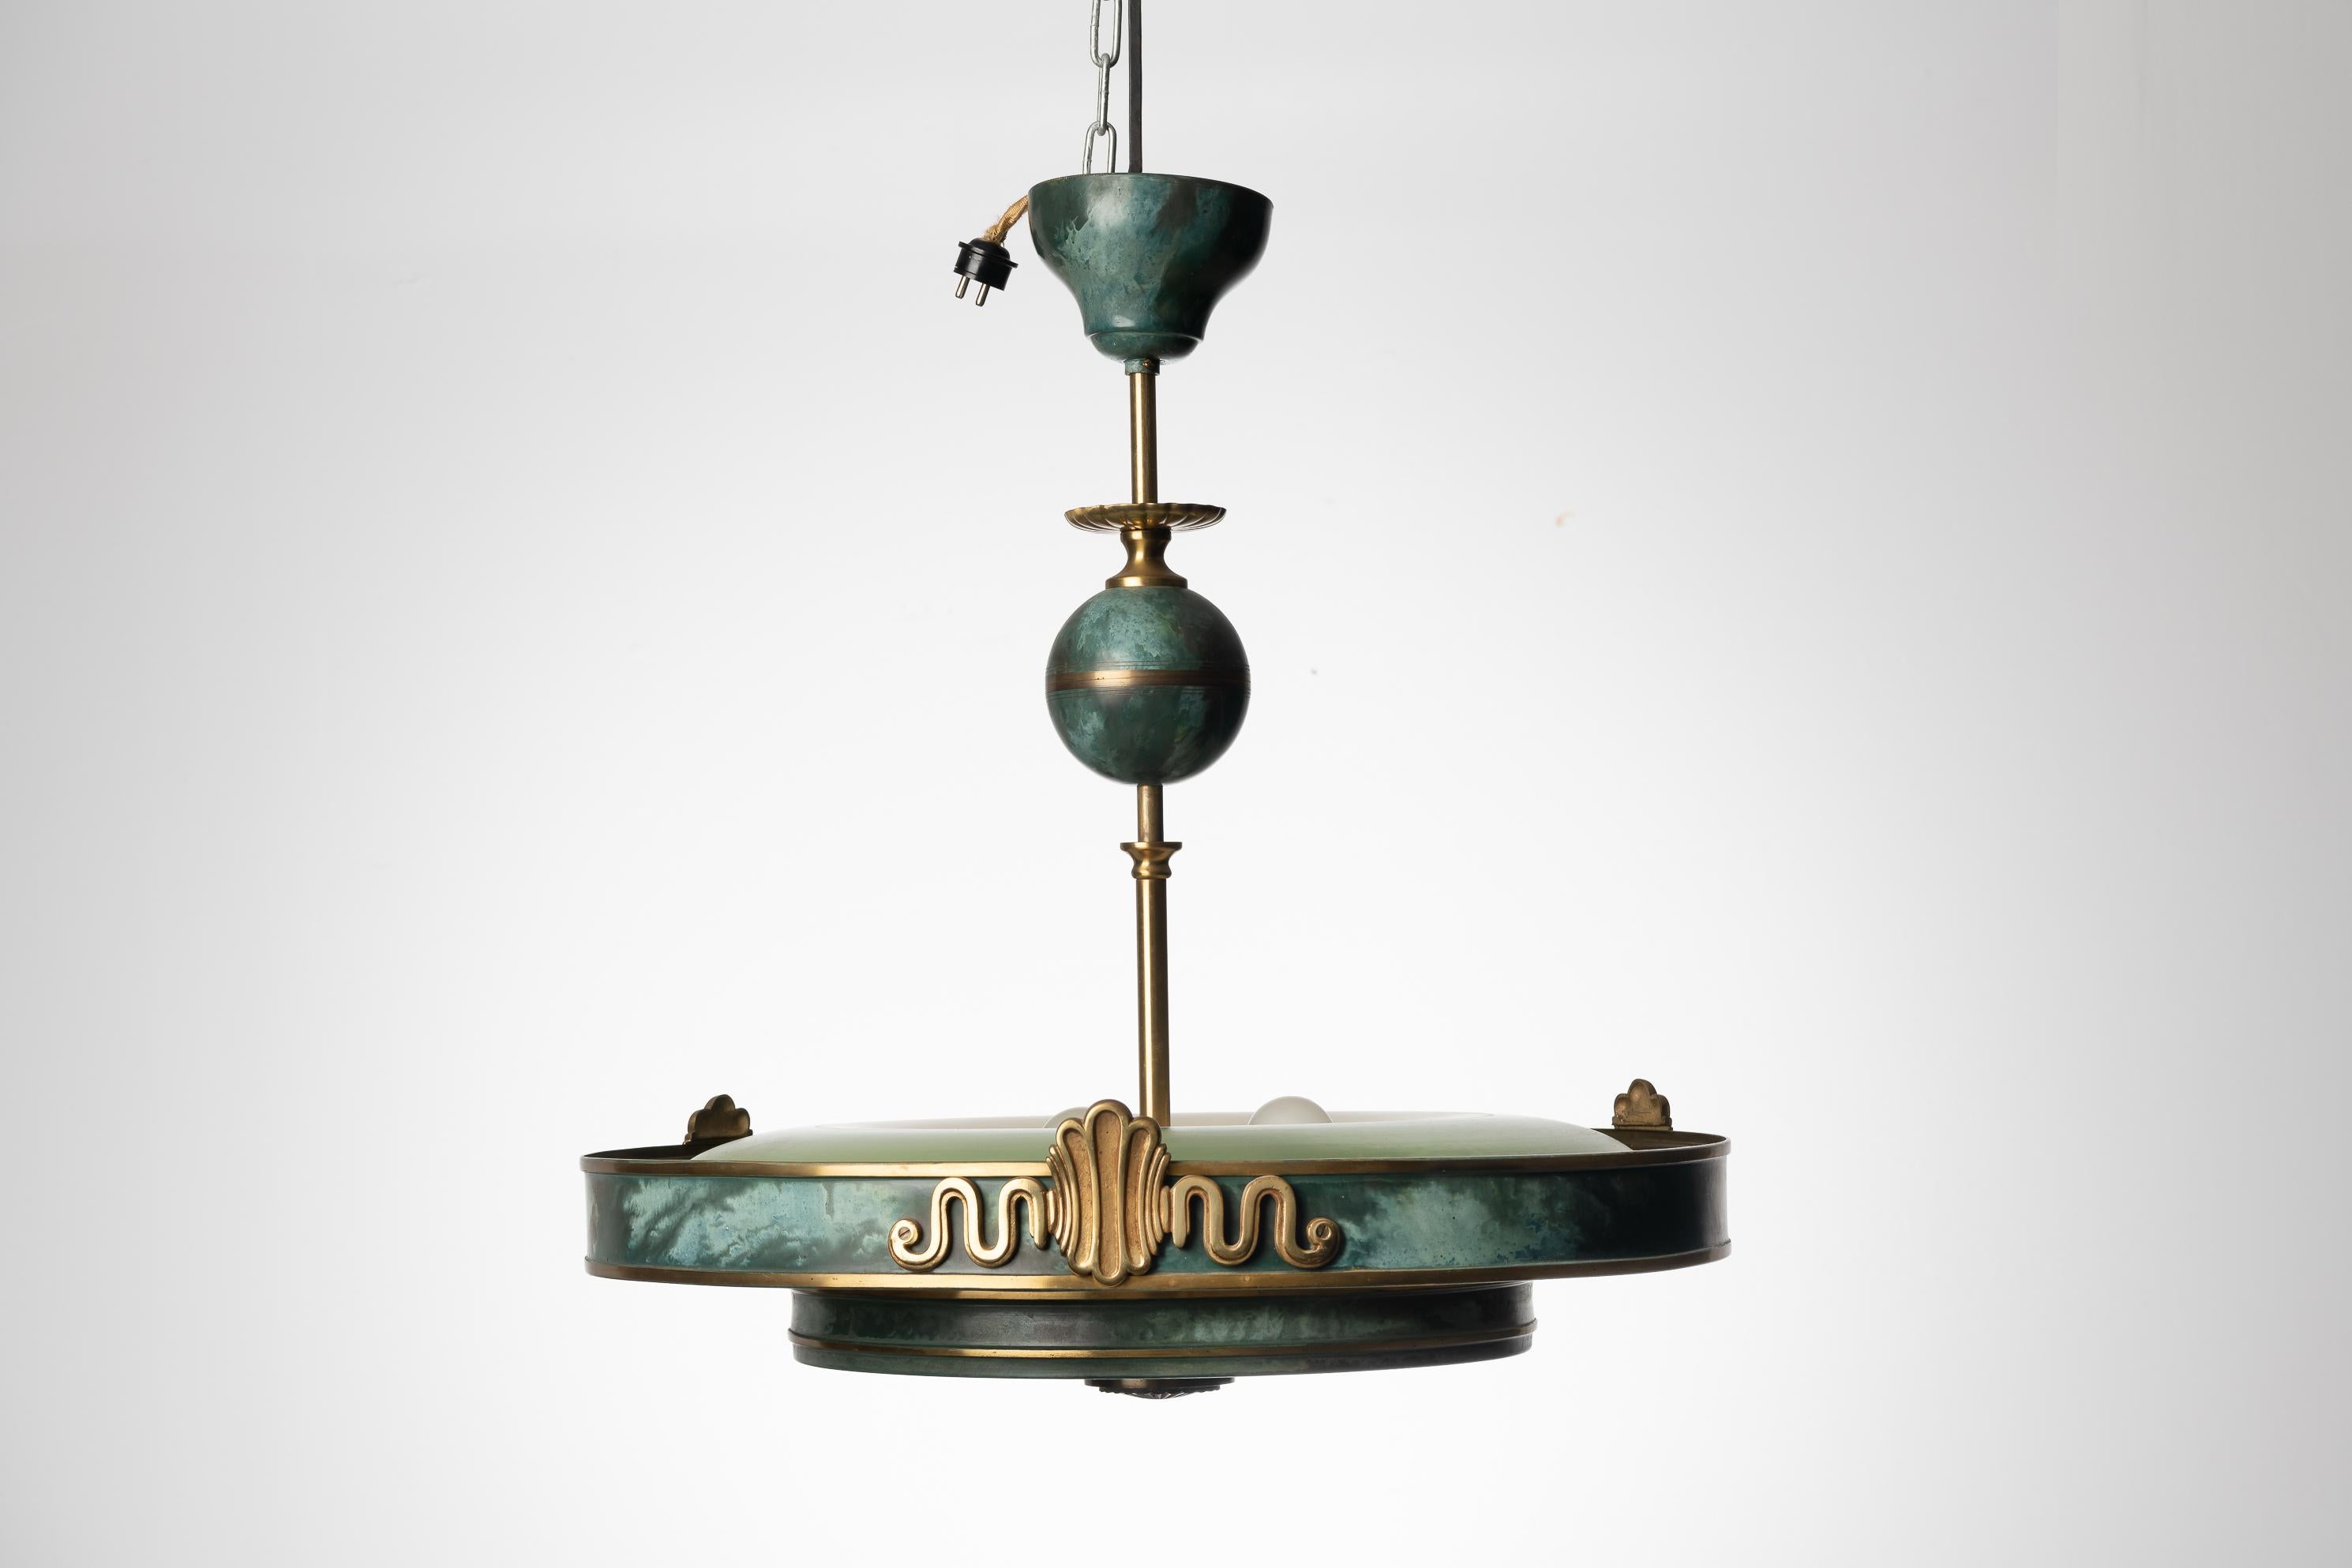 Art Deco ceiling light by Swedish manufacturer Böhlmarks Lampvarufabrik. The light is from around the 1930s. Made in plate metal that’s been patinated to become green with decorative elements in brass. The light is in the style of Harald Elof Notini